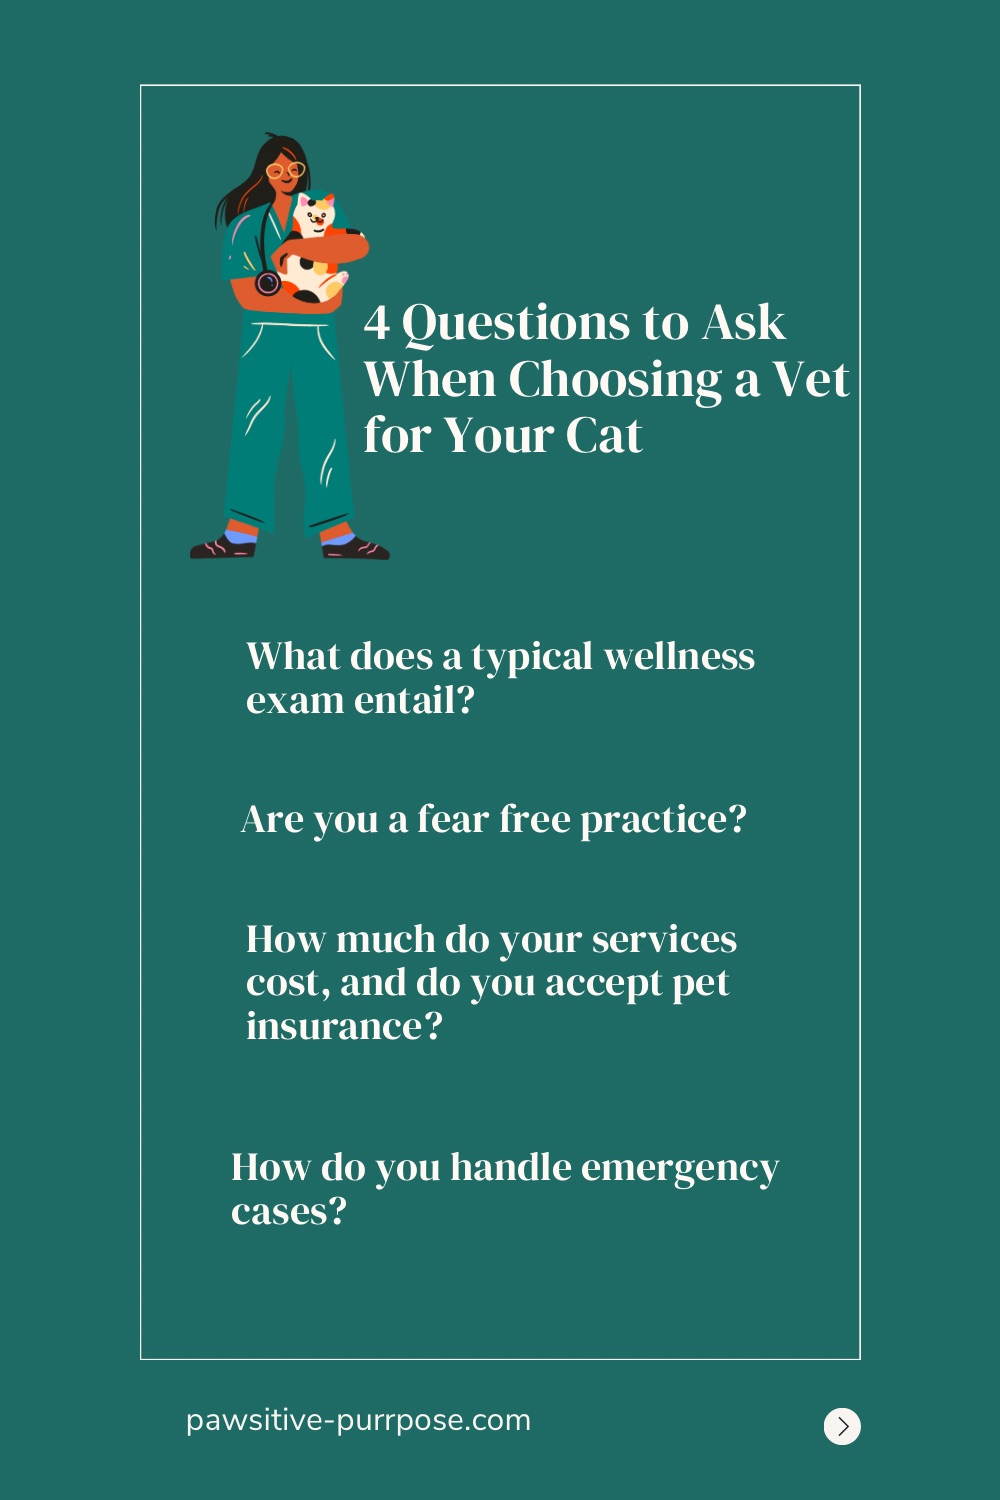 Questions to ask when finding a vet for your cat or pet